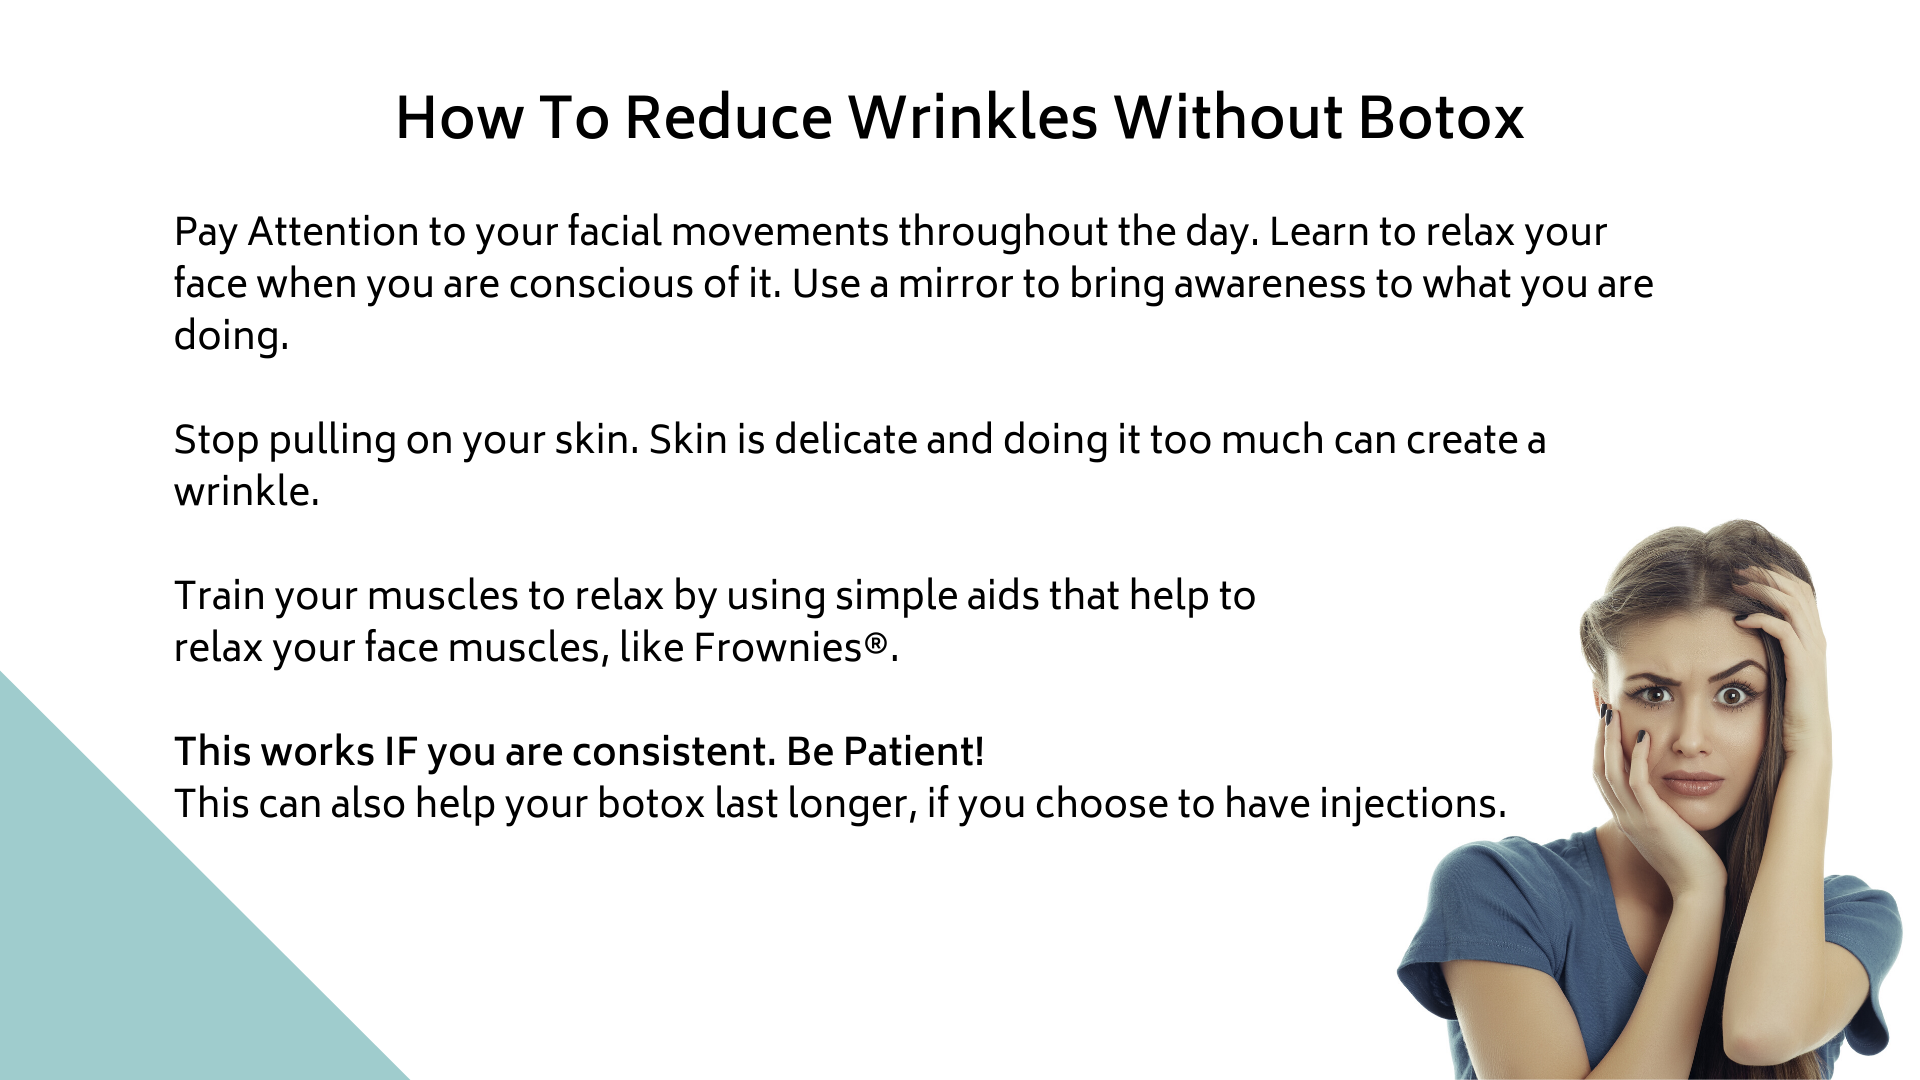 How-To-Reduce_Prevent-Wrinkles-Without-Botox